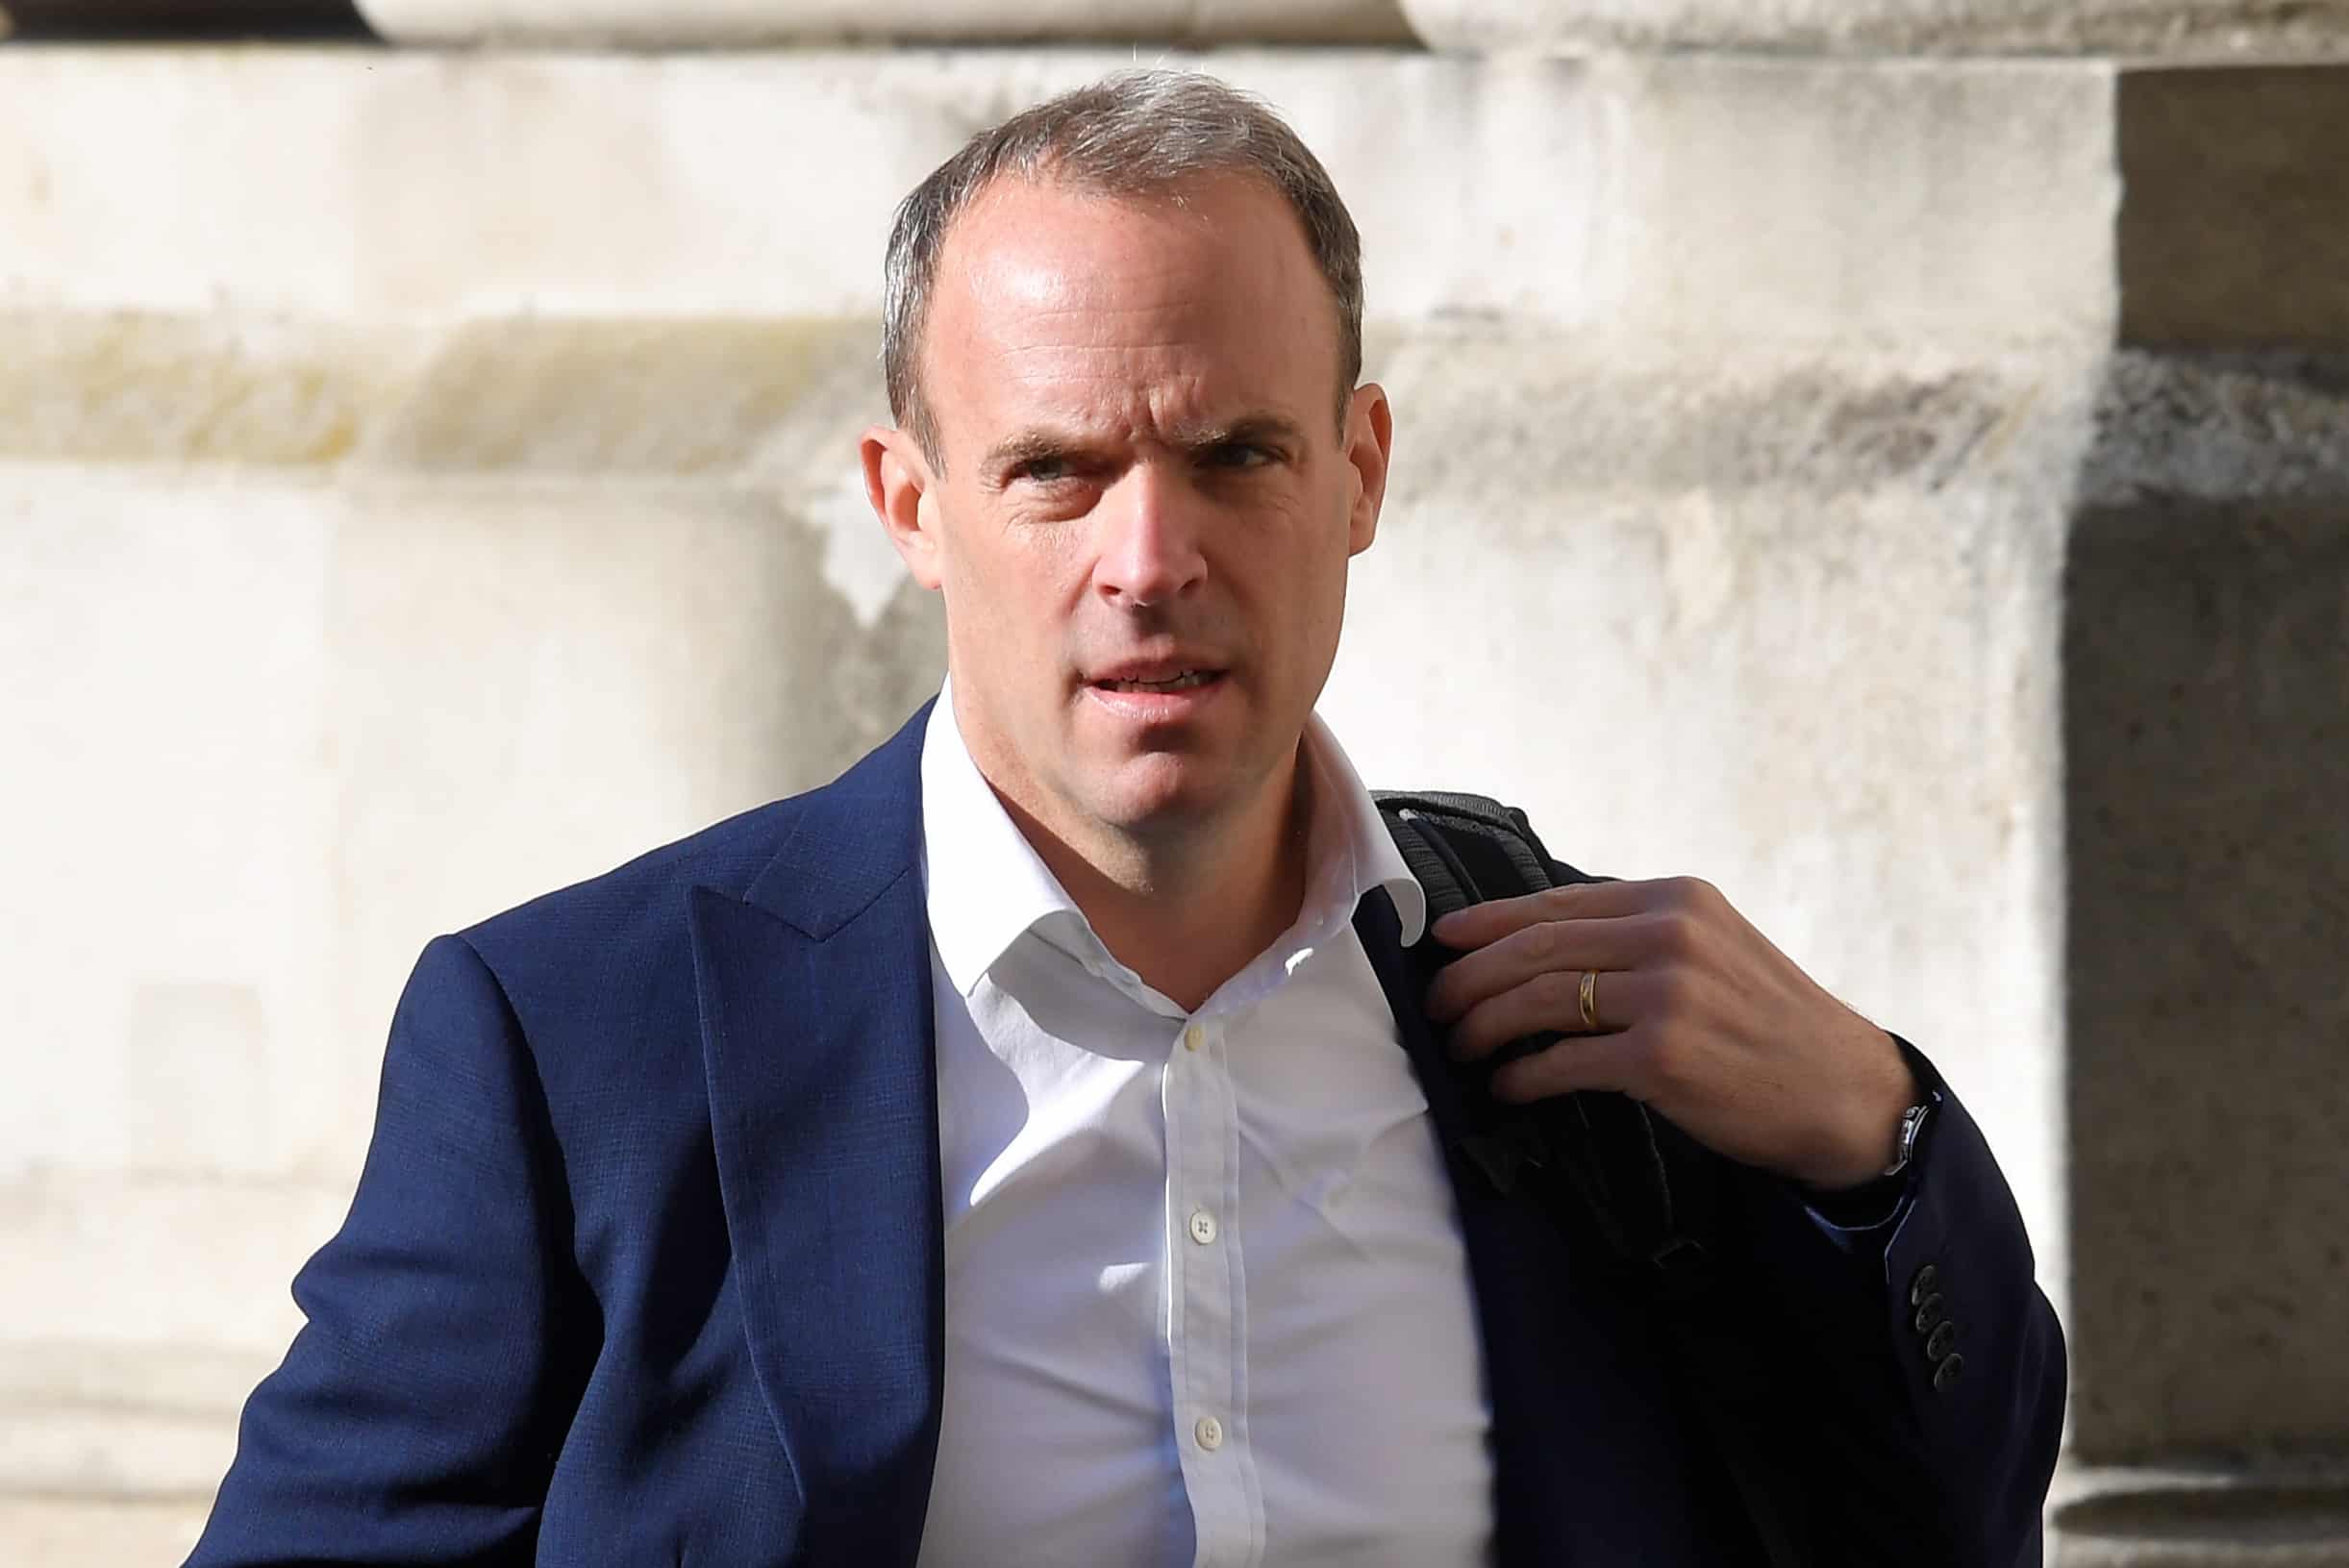 Dominic Raab laughs when asked what ideas he has to tackle the cost of living crisis